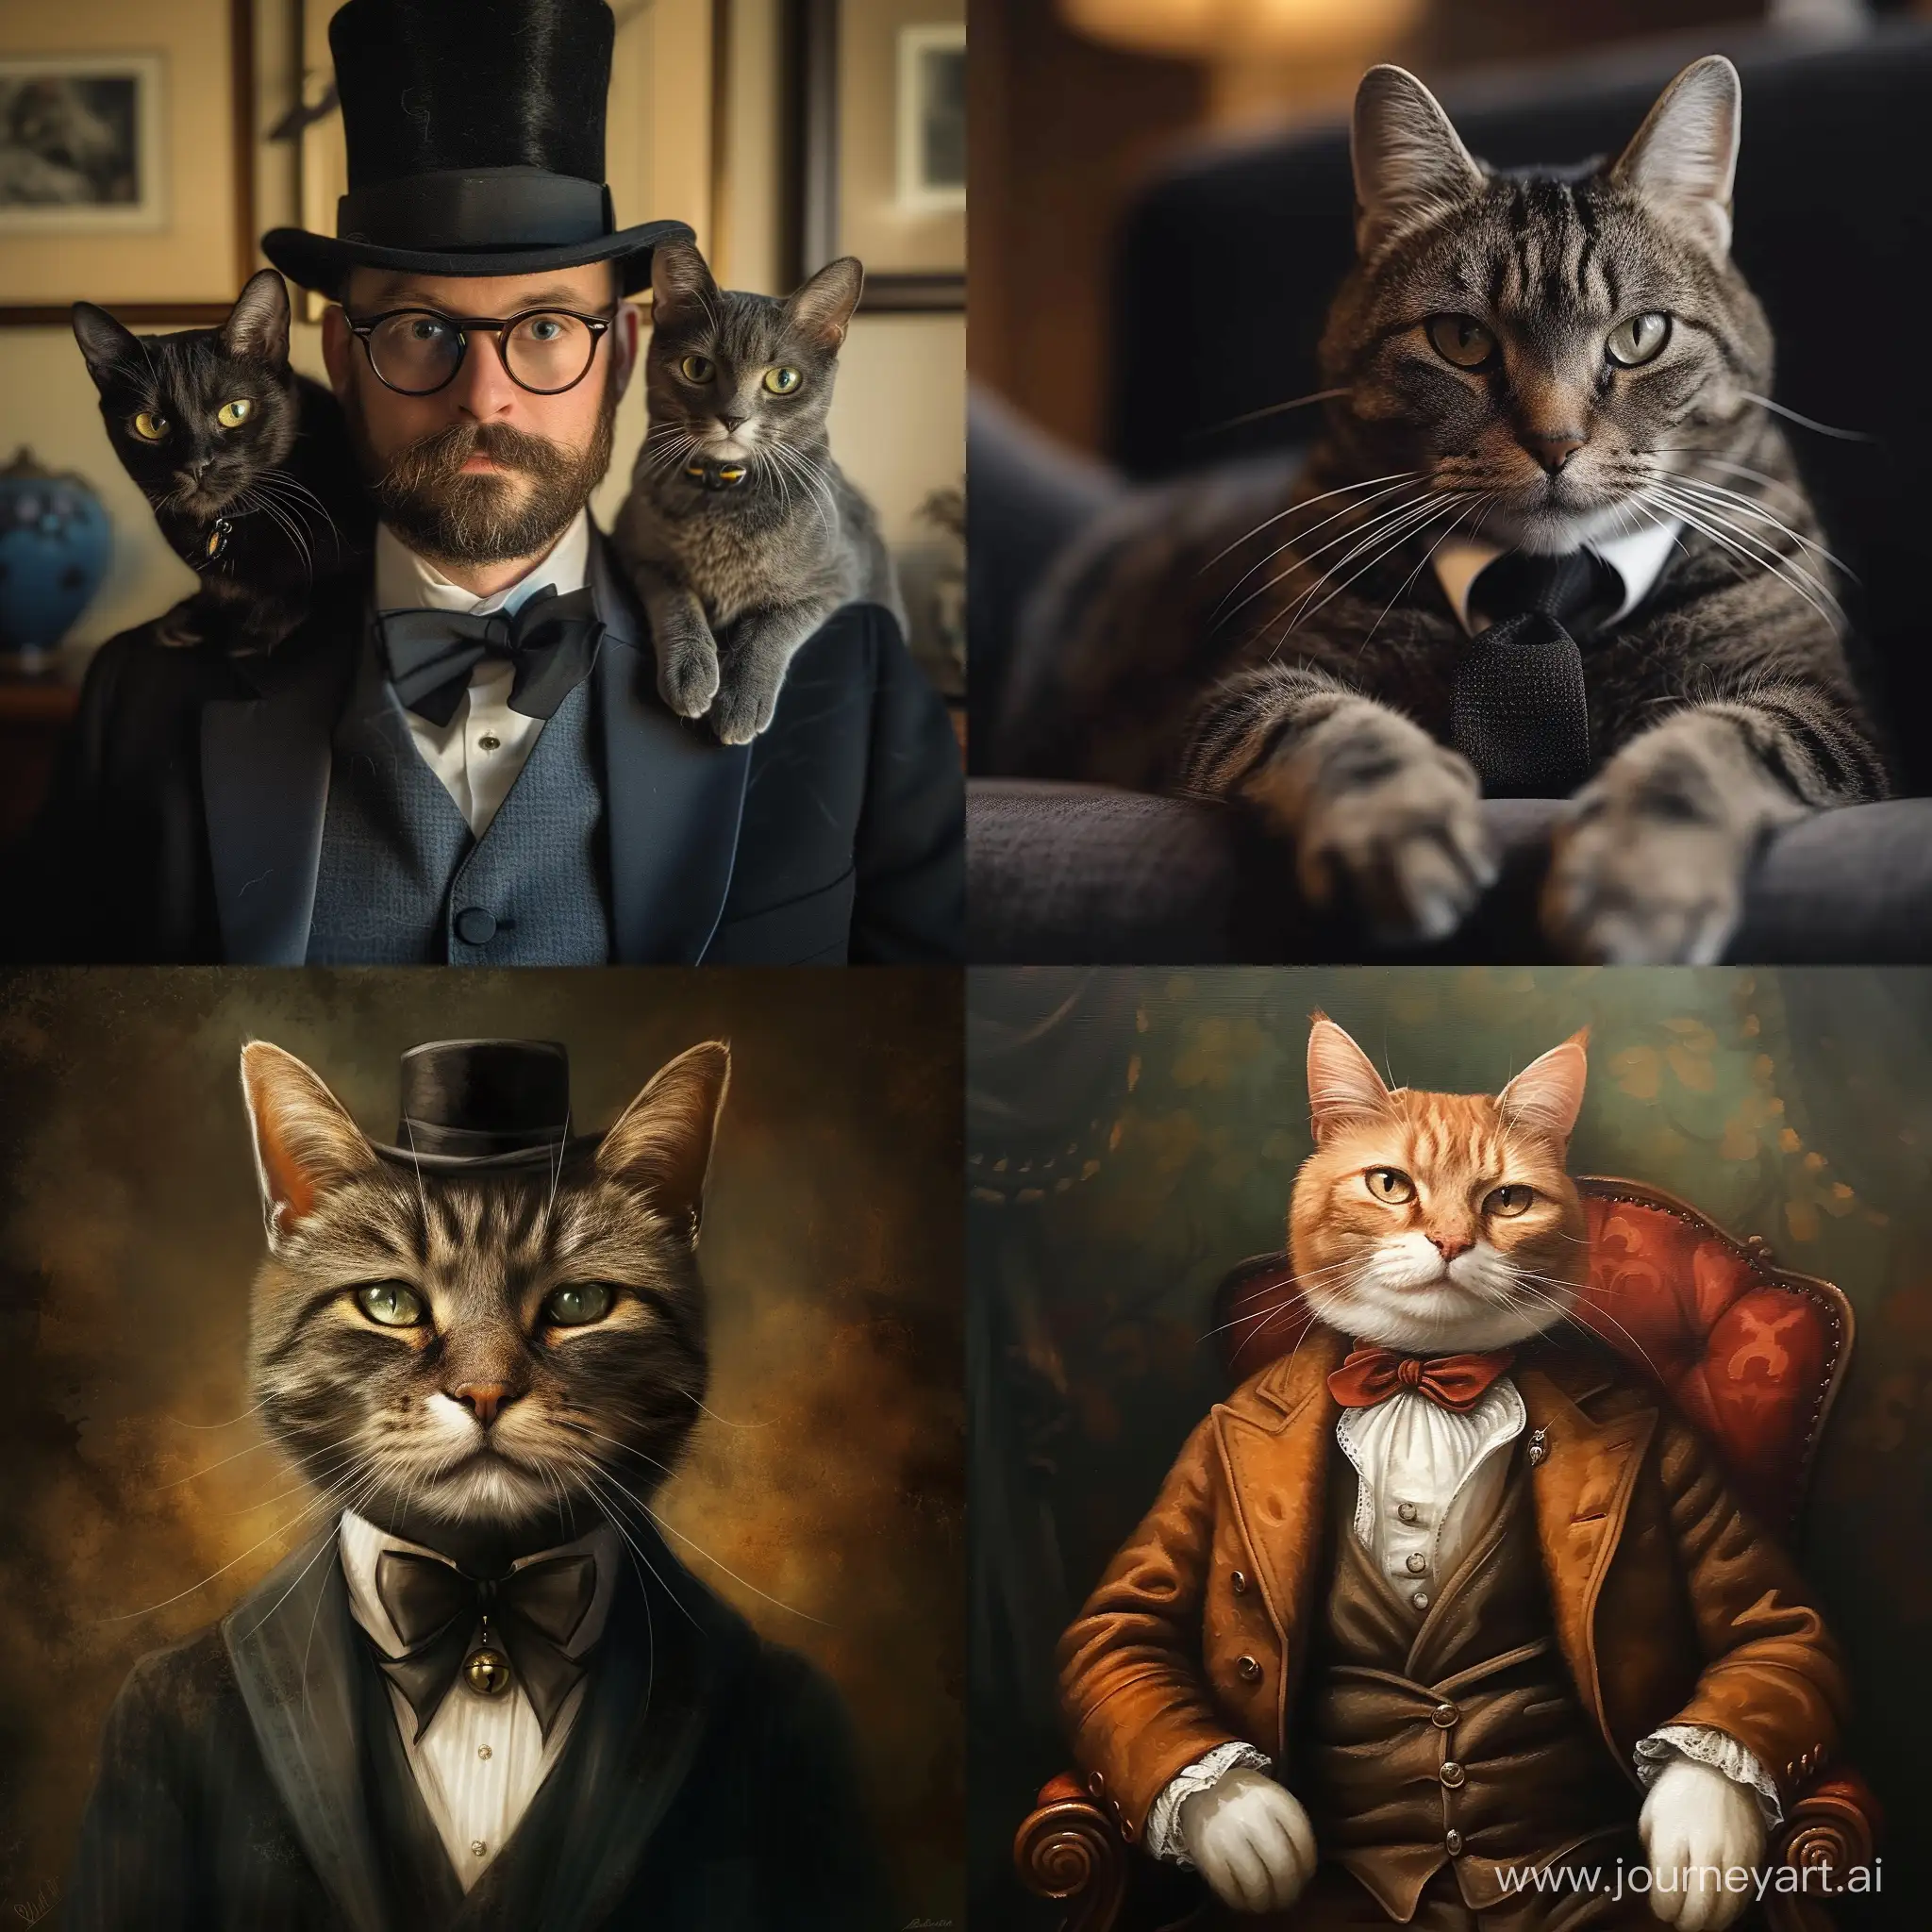 Take care of the cat gentleman